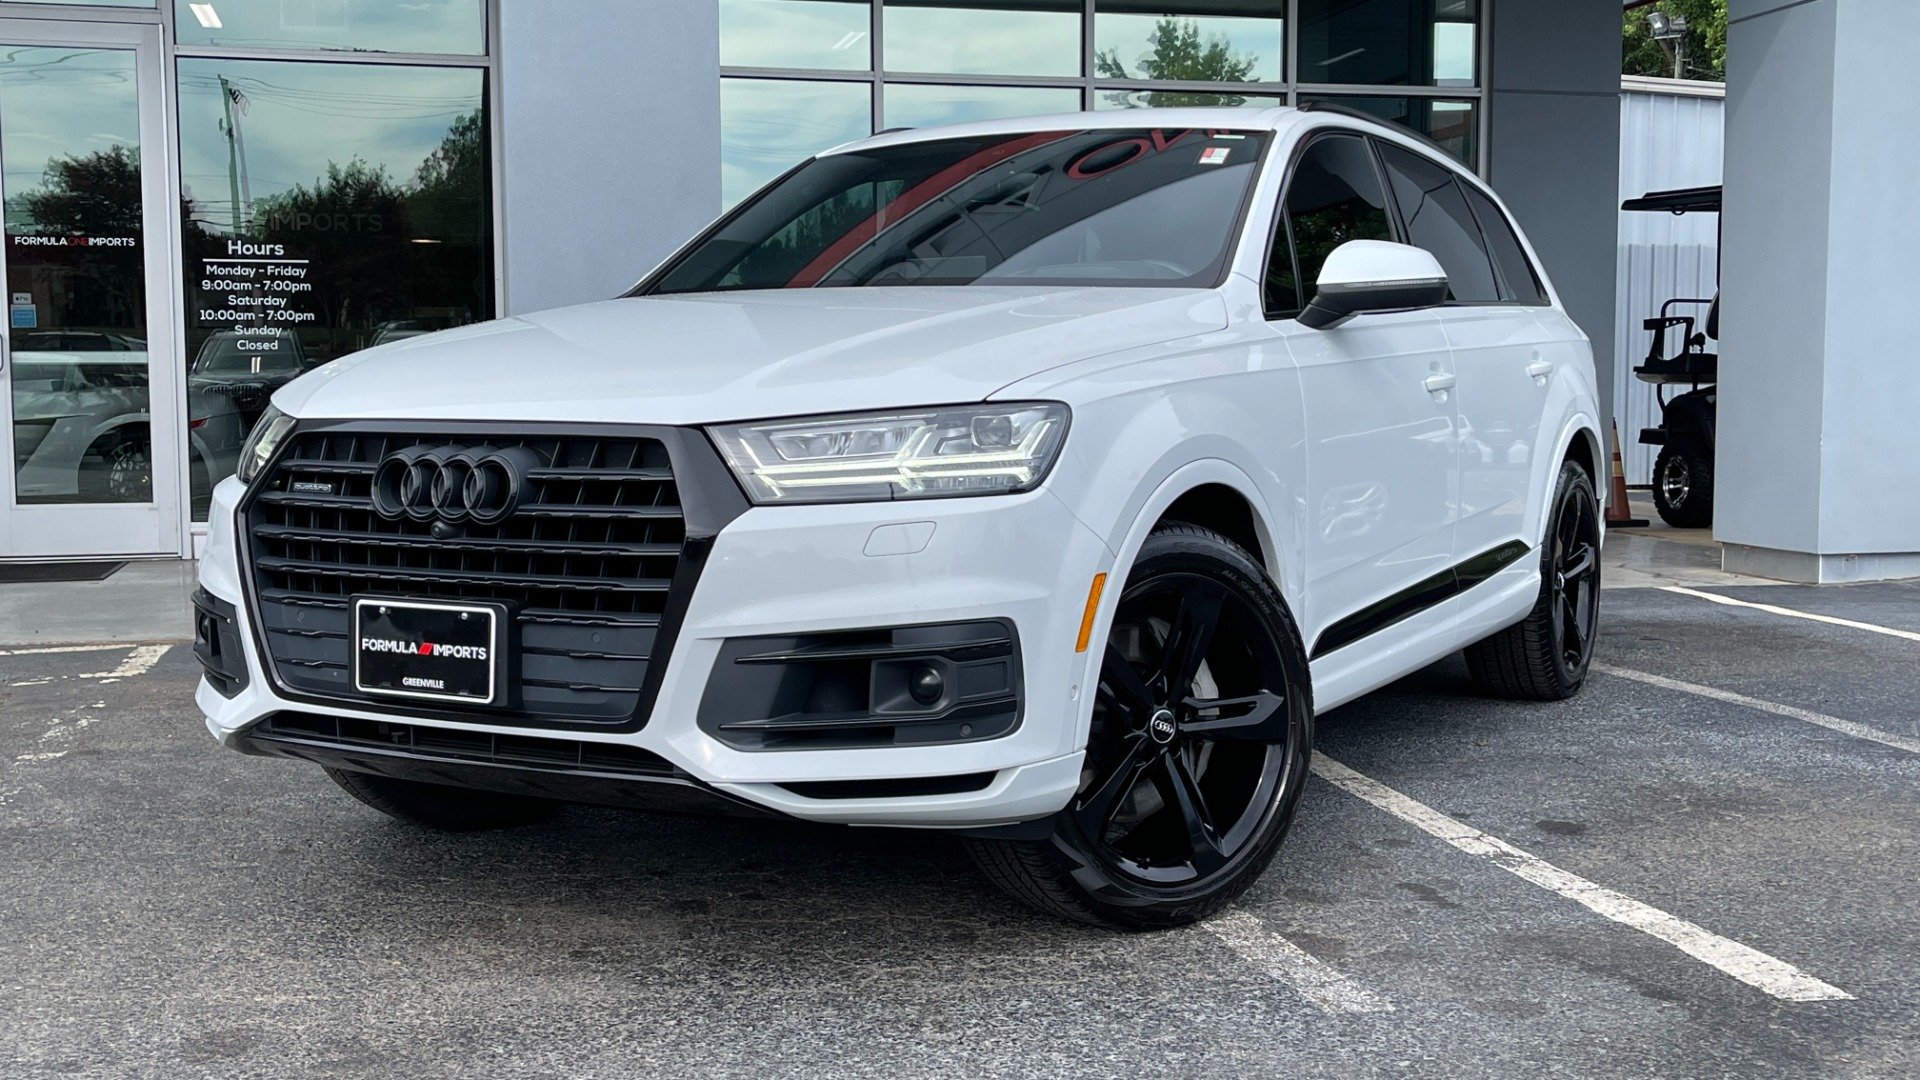 Used 2019 Audi Q7 PRESTIGE / NAV / SUNROOF / LANE ASST / TOWING / 21-IN WHLS / REA for sale $50,995 at Formula Imports in Charlotte NC 28227 74